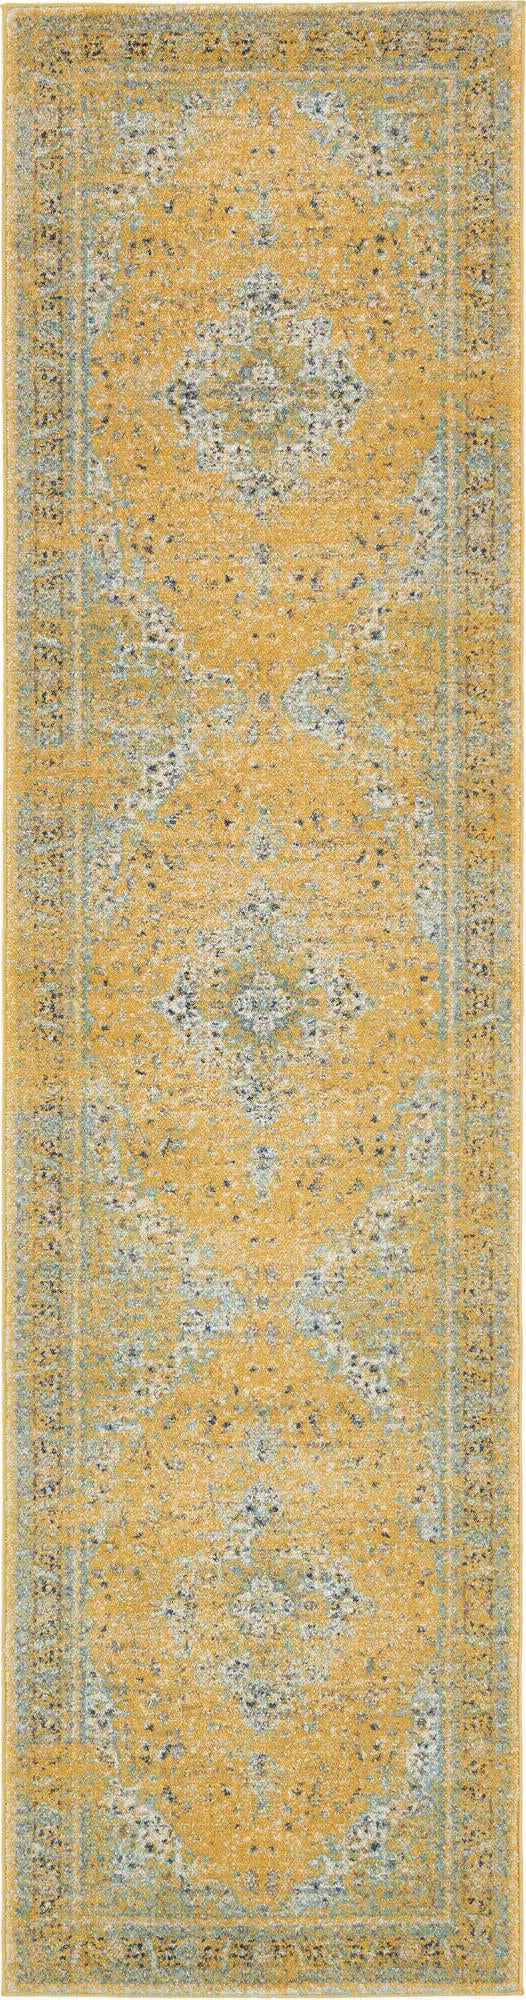 Unique Loom Tradition T-HERITAGE-5258A Yellow Area Rug main image